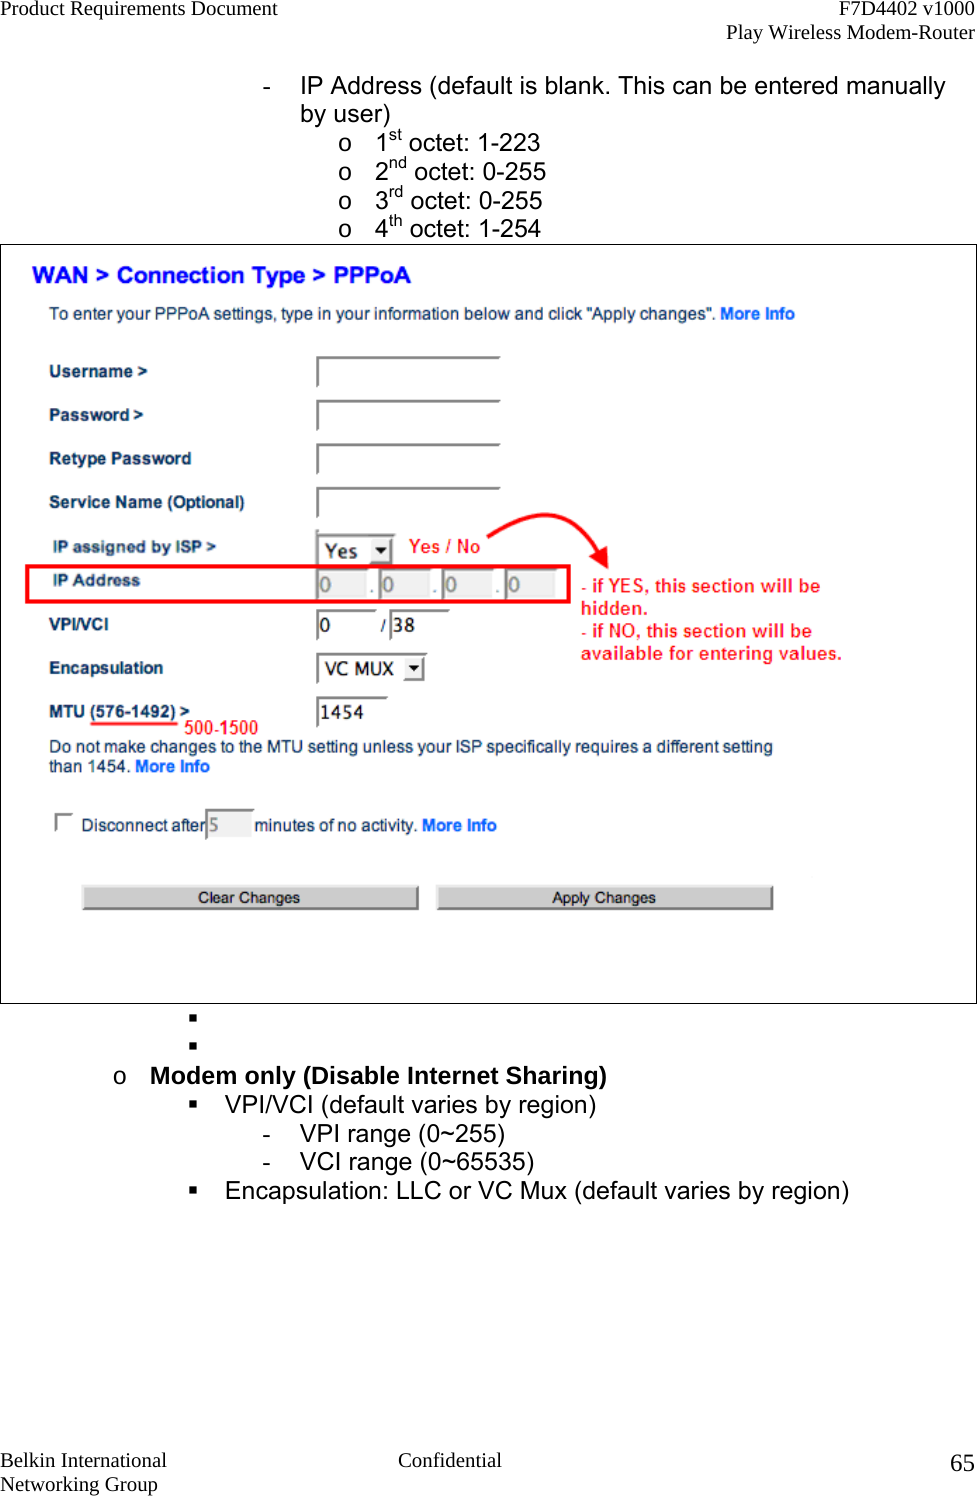 Product Requirements Document    F7D4402 v1000     Play Wireless Modem-Router  Belkin International  Confidential Networking Group 65-  IP Address (default is blank. This can be entered manually by user) o  1st octet: 1-223 o  2nd octet: 0-255 o  3rd octet: 0-255 o  4th octet: 1-254      o  Modem only (Disable Internet Sharing)  VPI/VCI (default varies by region) -  VPI range (0~255) -  VCI range (0~65535)  Encapsulation: LLC or VC Mux (default varies by region) 